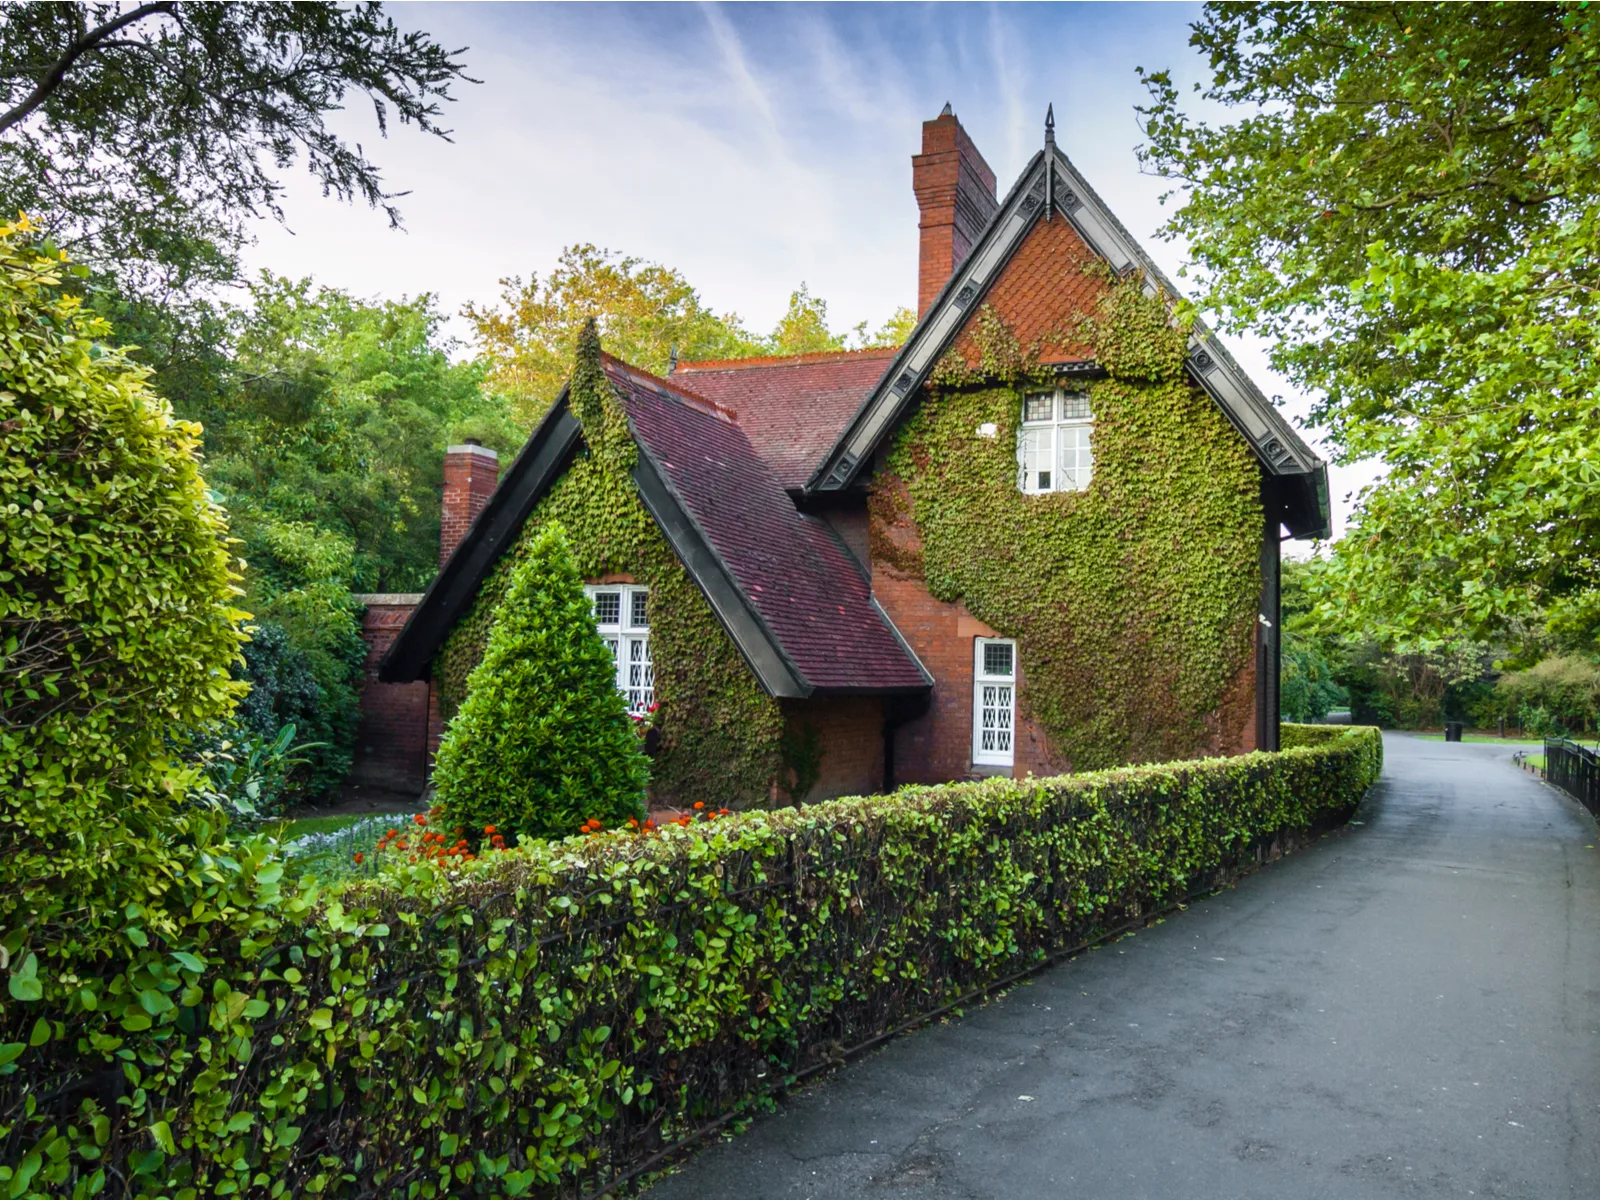 Mysterious house covered in vines in Dublin, one of the best places to visit in Ireland